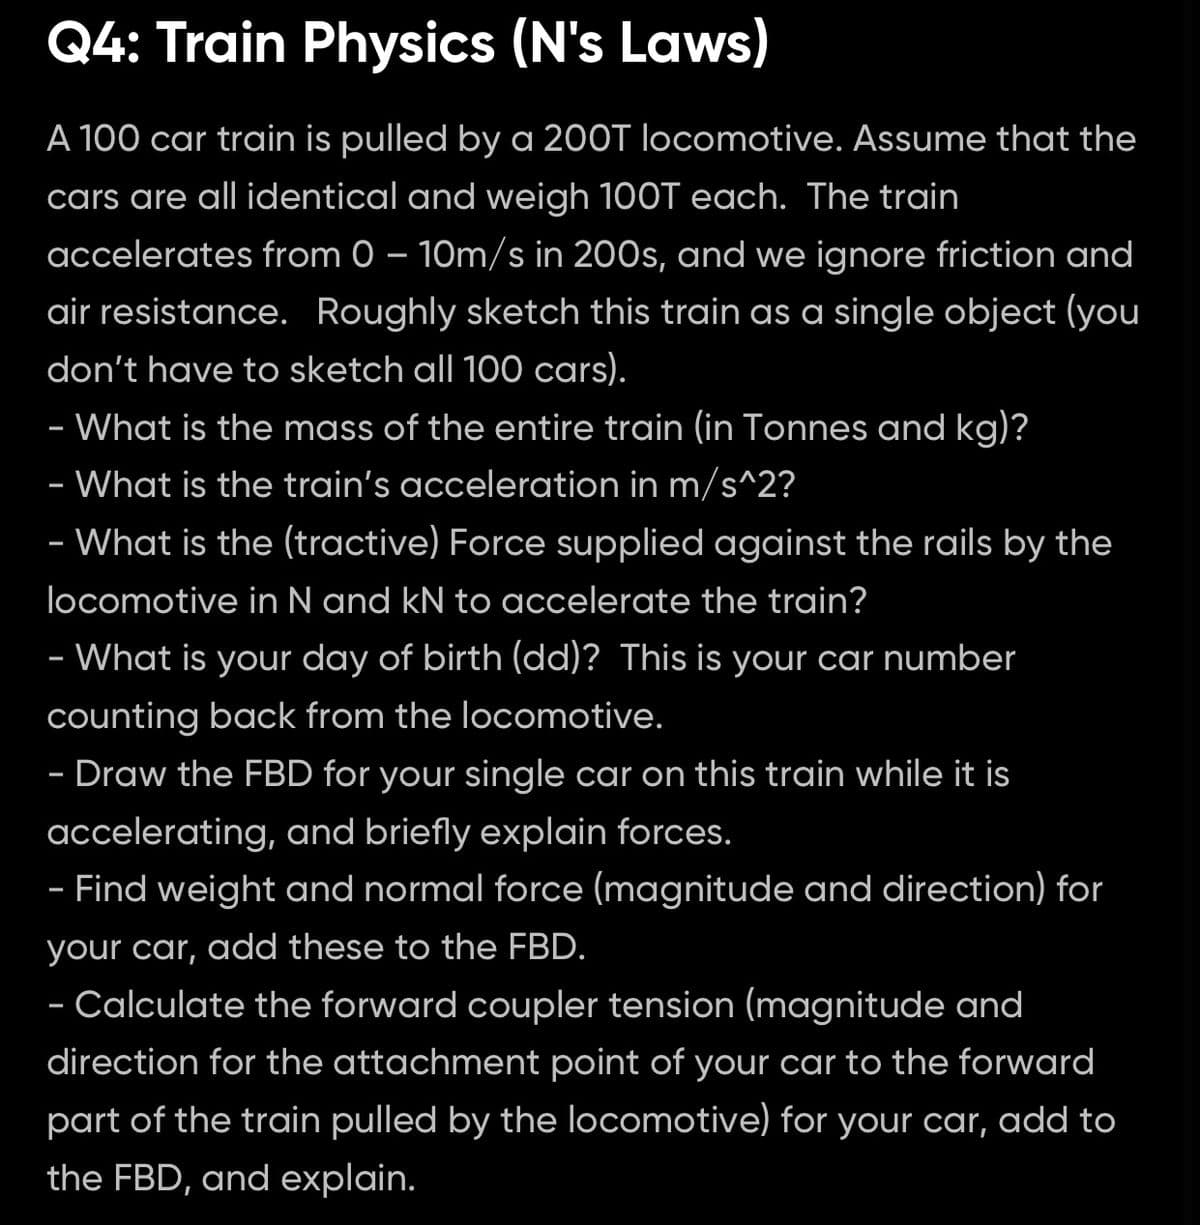 Q4: Train Physics (N's Laws)
A 100 car train is pulled by a 200T locomotive. Assume that the
cars are all identical and weigh 100T each. The train
accelerates from 0 – 10m/s in 200s, and we ignore friction and
air resistance. Roughly sketch this train as a single object (you
don't have to sketch all 100 cars).
- What is the mass of the entire train (in Tonnes and kg)?
-
- What is the train's acceleration in m/s^2?
- What is the (tractive) Force supplied against the rails by the
locomotive in N and kN to accelerate the train?
- What is your day of birth (dd)? This is your car number
counting back from the locomotive.
- Draw the FBD for your single car on this train while it is
-
accelerating, and briefly explain forces.
- Find weight and normal force (magnitude and direction) for
your car, add these to the FBD.
- Calculate the forward coupler tension (magnitude and
direction for the attachment point of your car to the forward
part of the train pulled by the locomotive) for your car, add to
the FBD, and explain.
